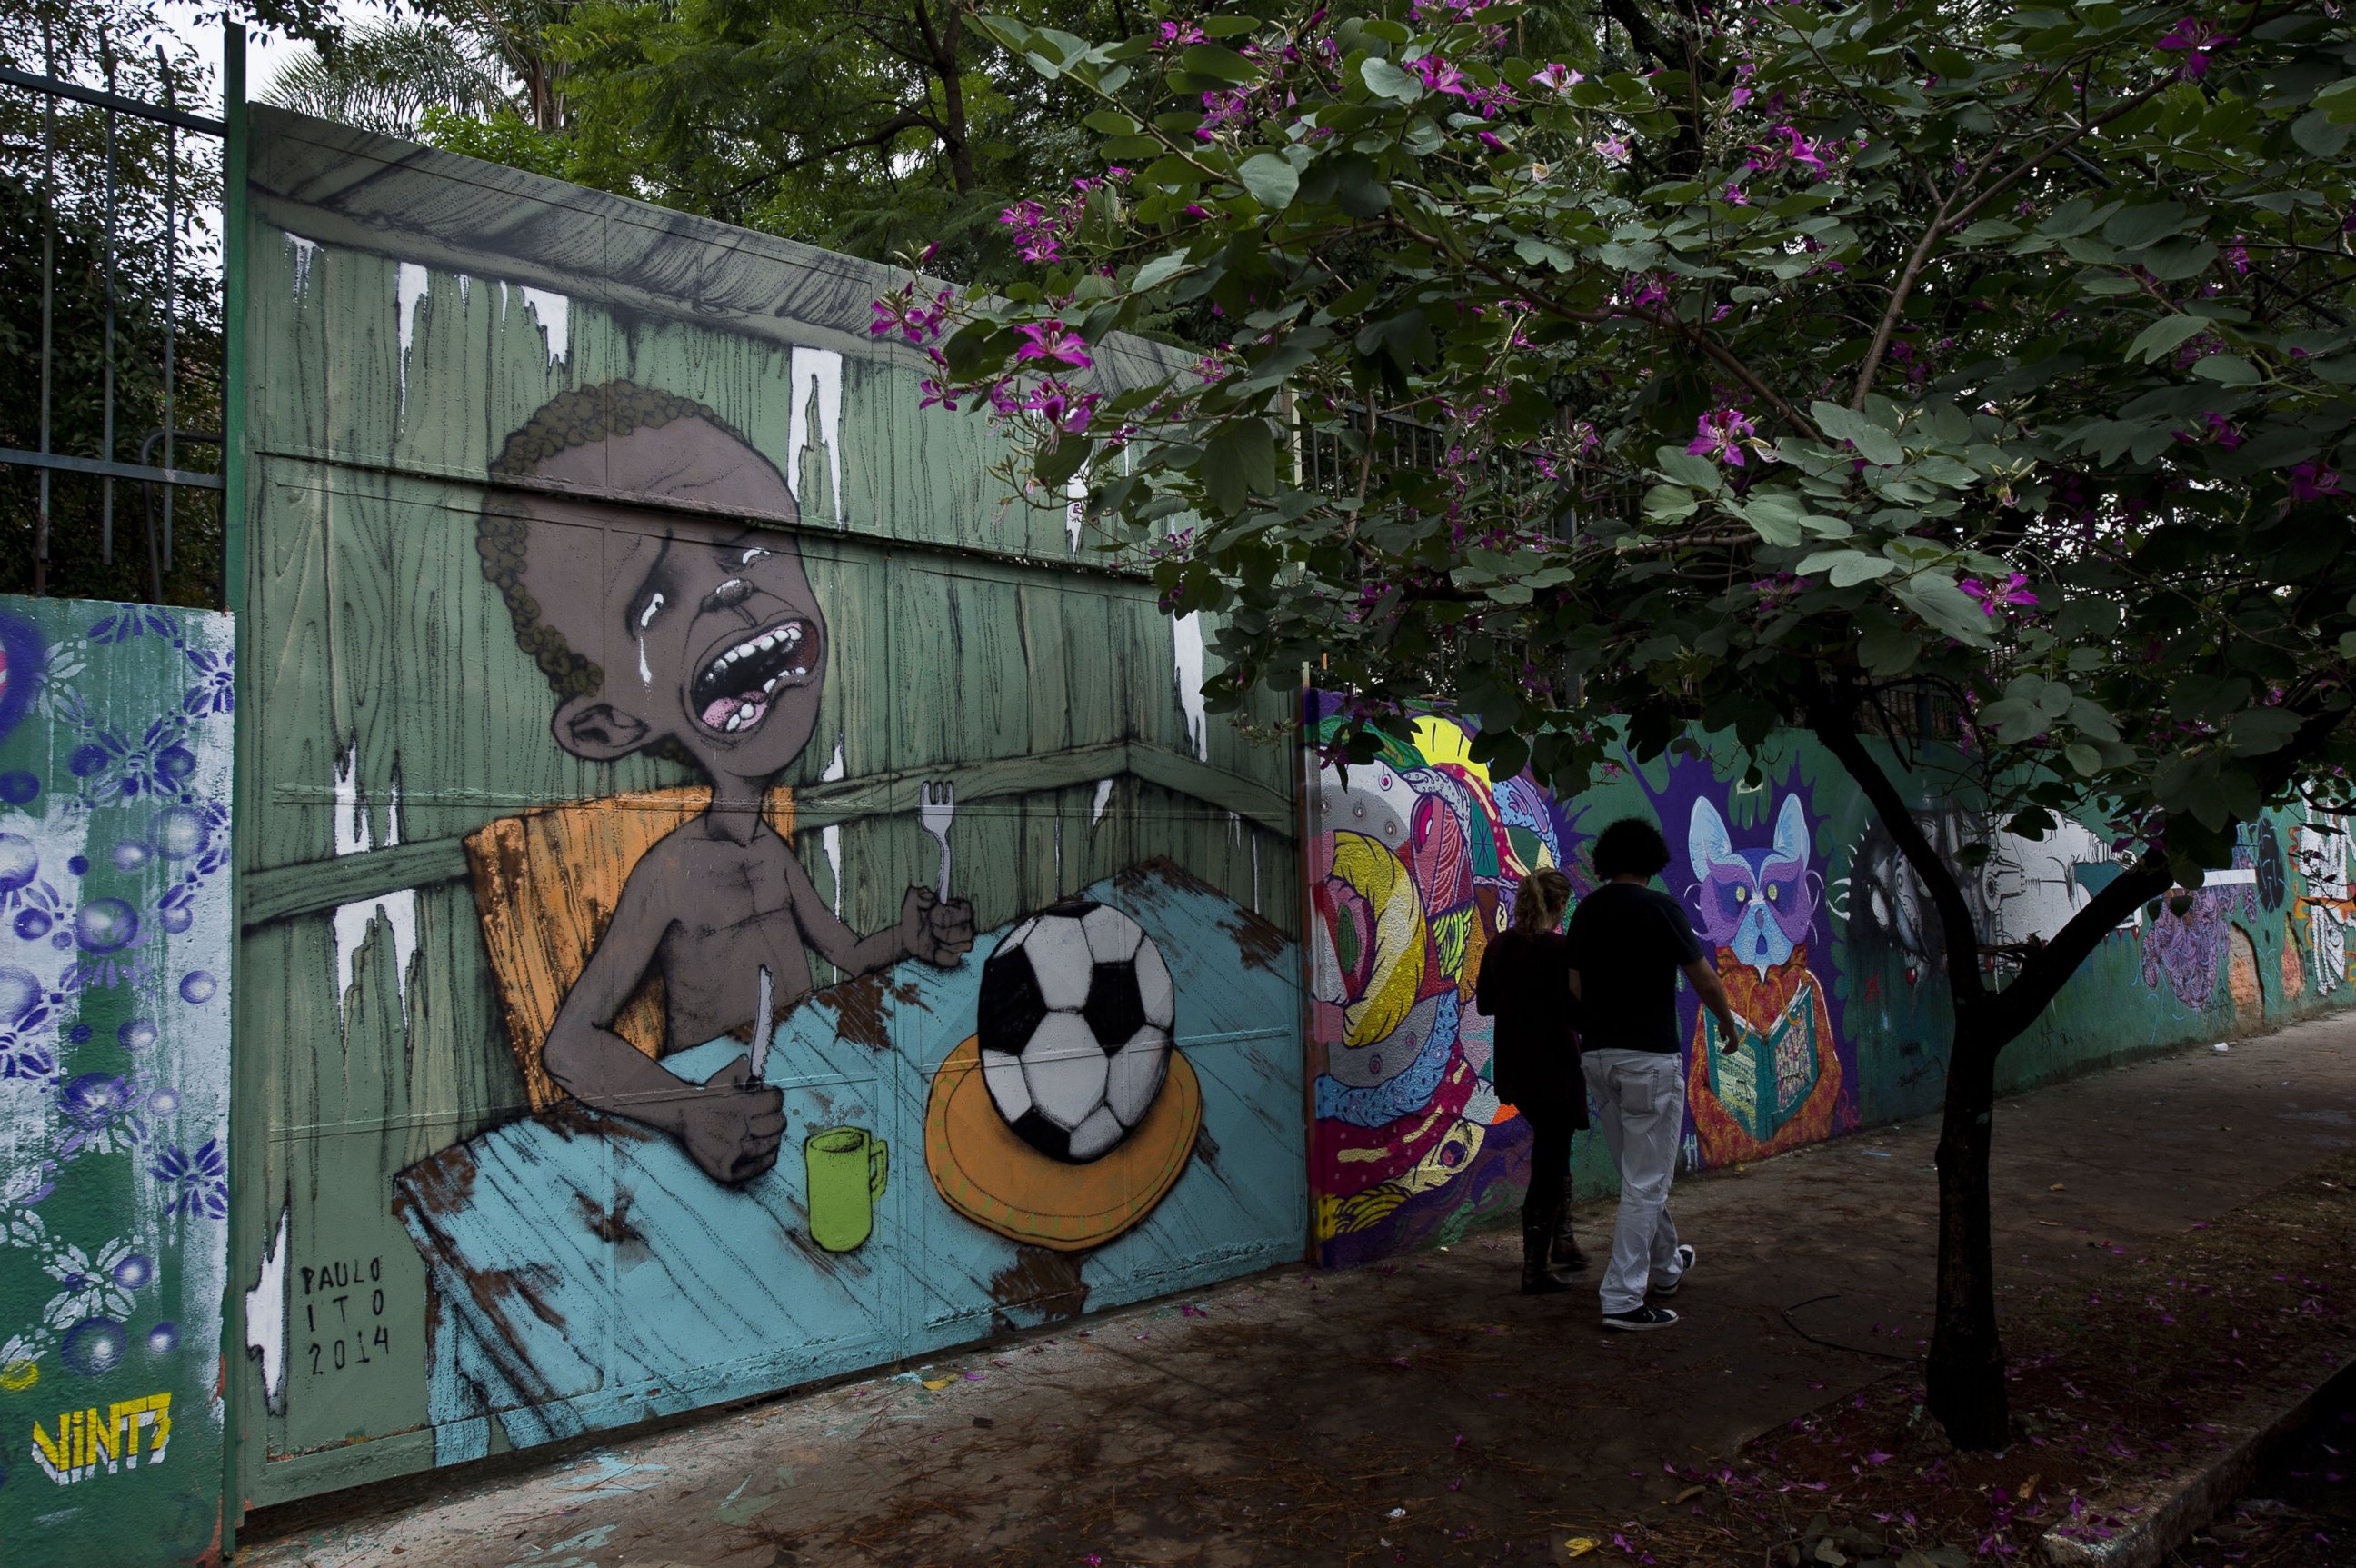 PHOTO: People walk past a graffiti painted by Brazilian street artist Paulo Ito on the entrance of a public schoolhouse in Sao Paulo, Brazil on May 23, 2014.